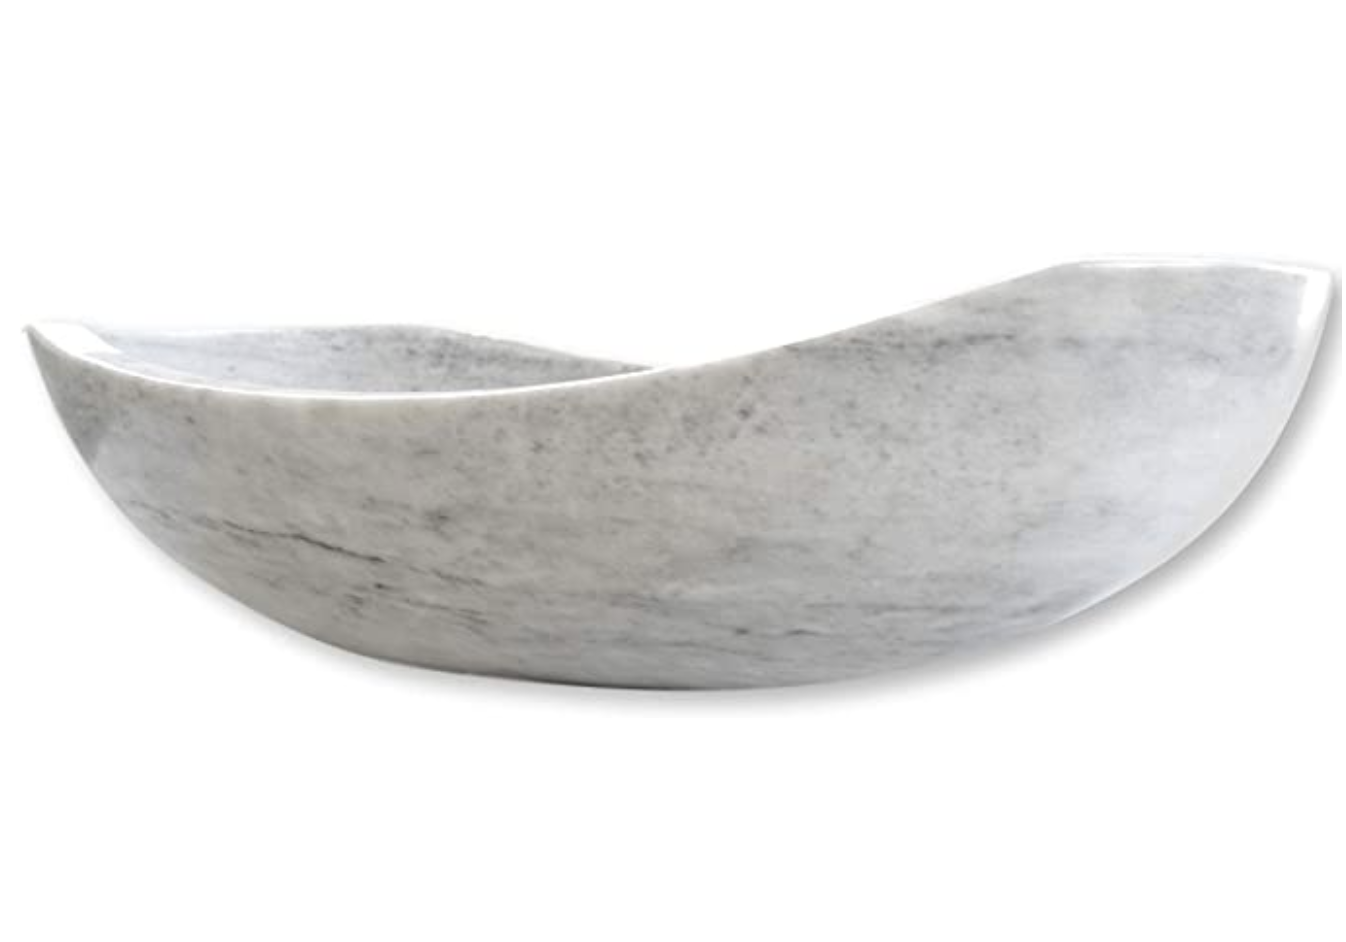 Polished Marble Bathroom Vessel Sink, Oval Canoe Shape, 100% Natural Stone, Hand Carved, Free Matching Soap Tray (Marble Light Gray)